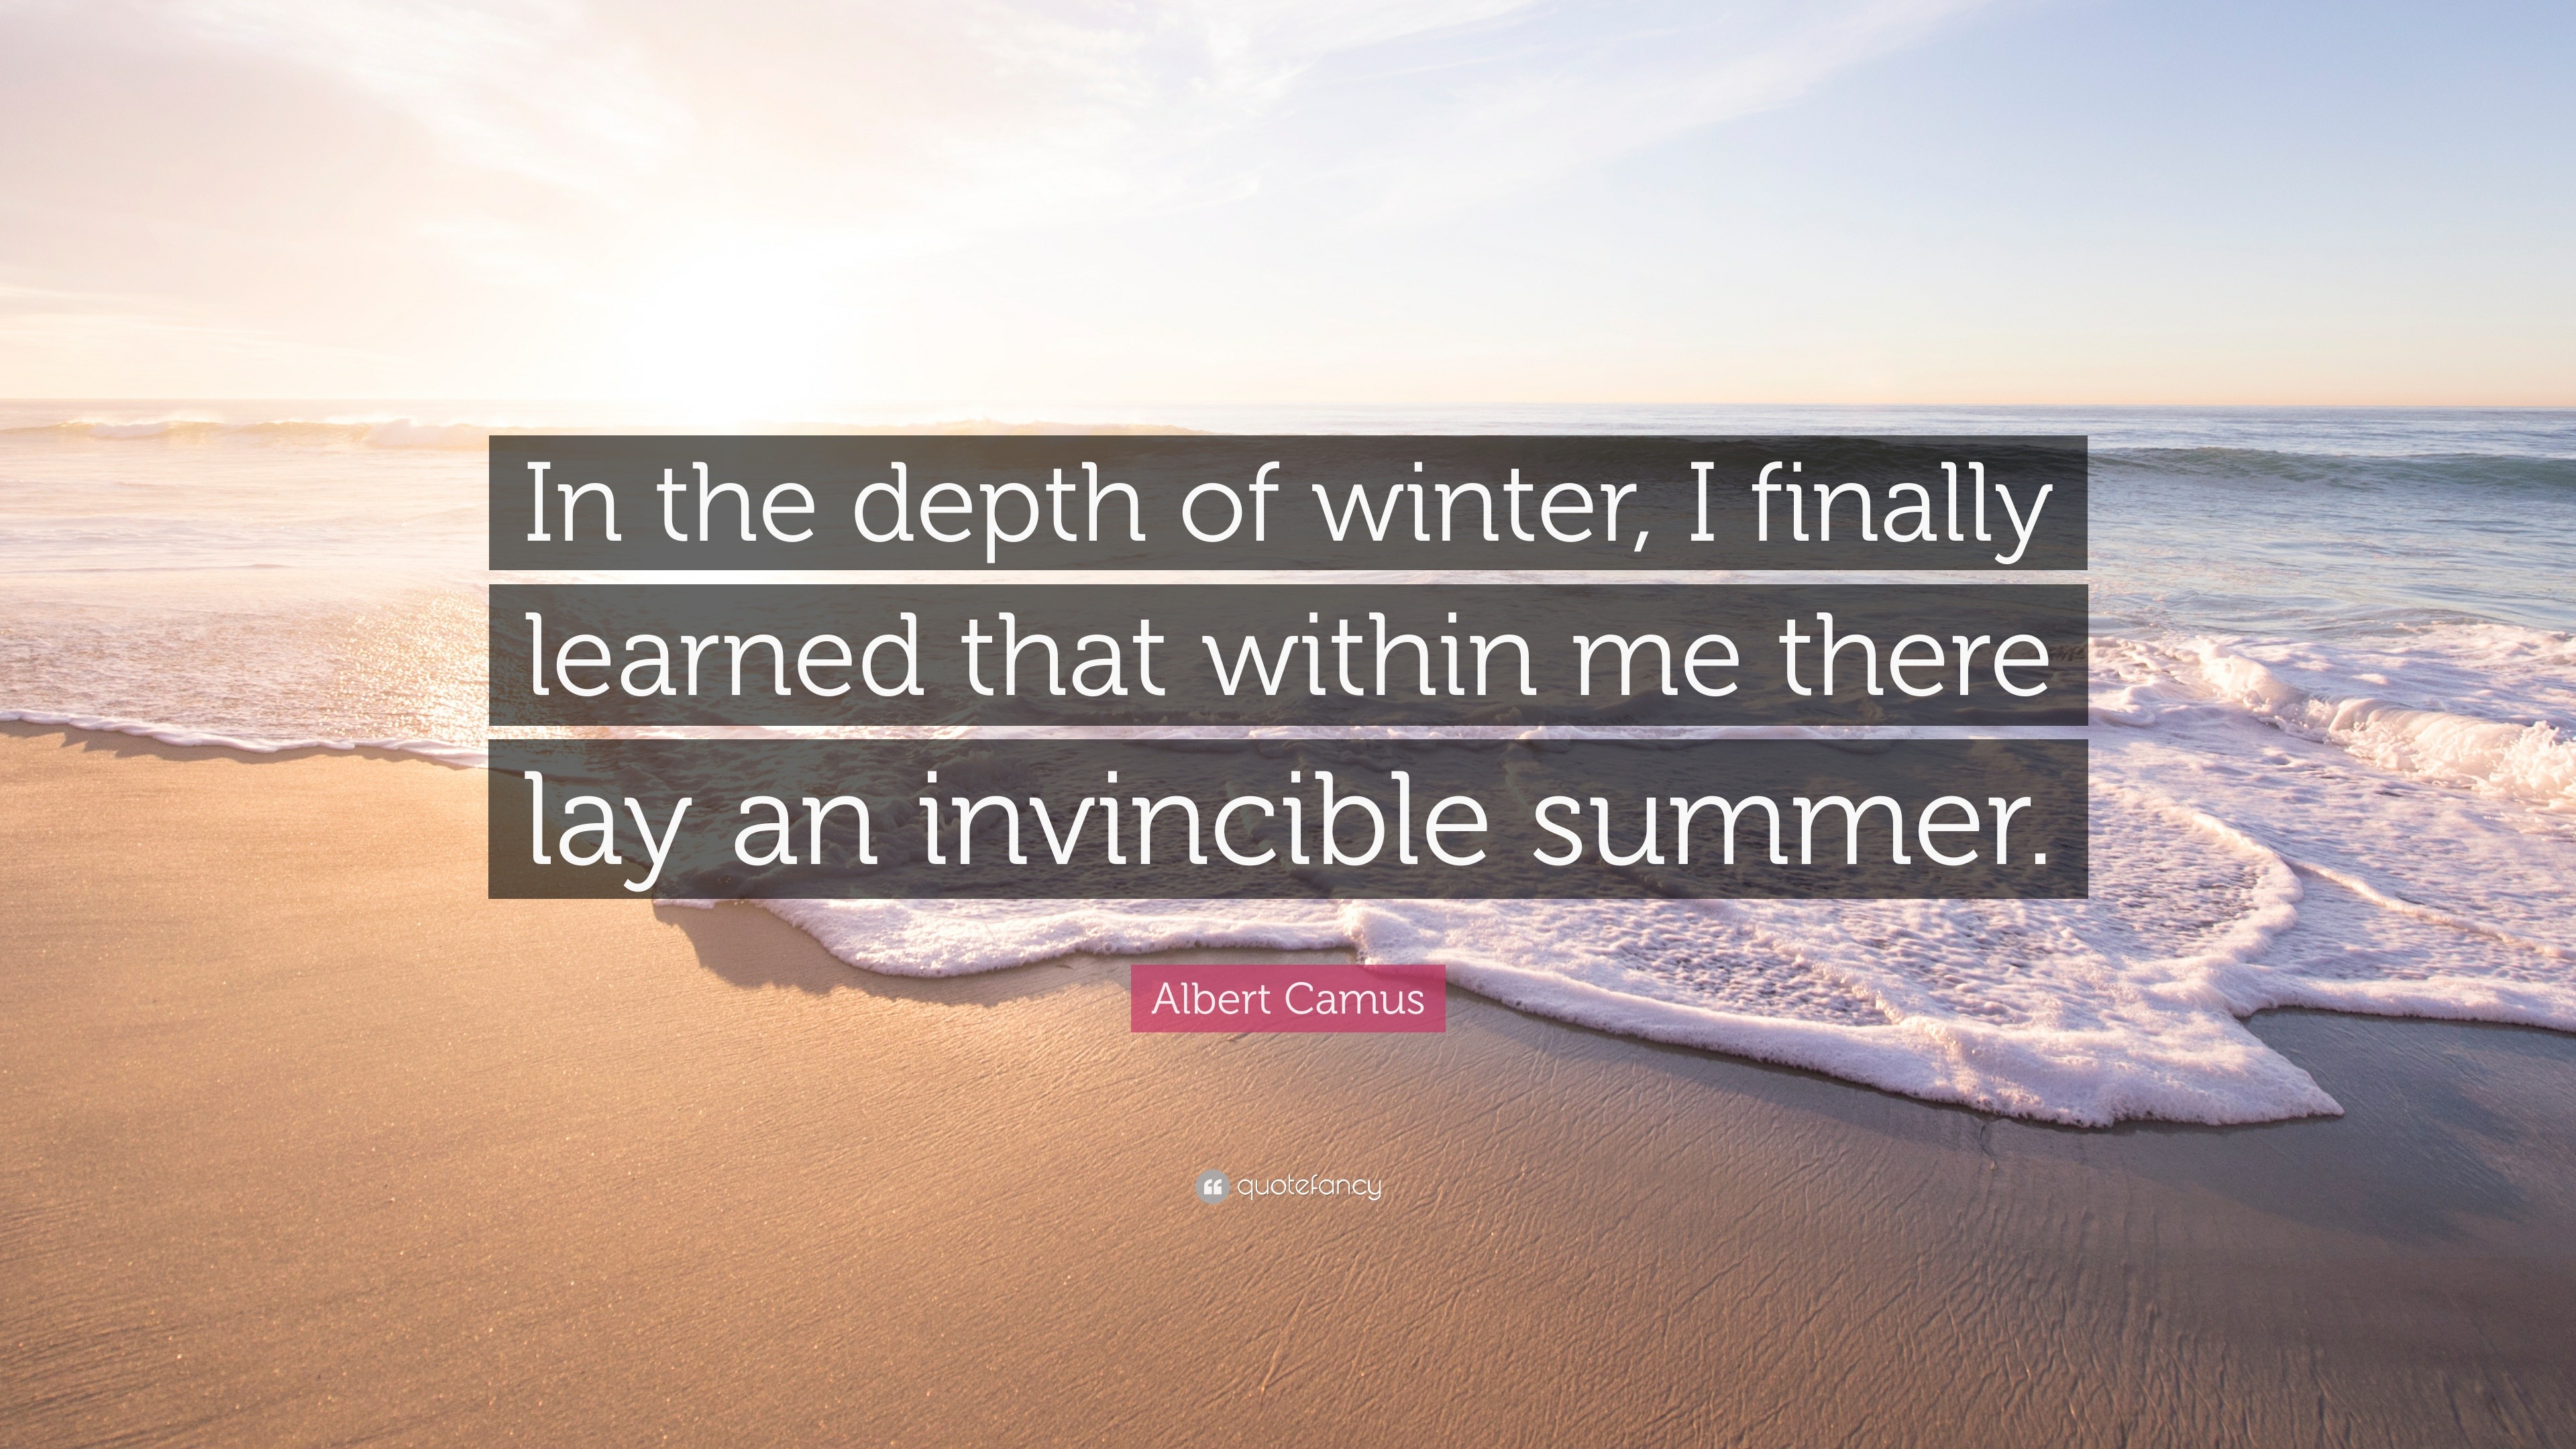 Albert Camus Quote 5x7 In the Depth of Winter I Finally Learned That Within...